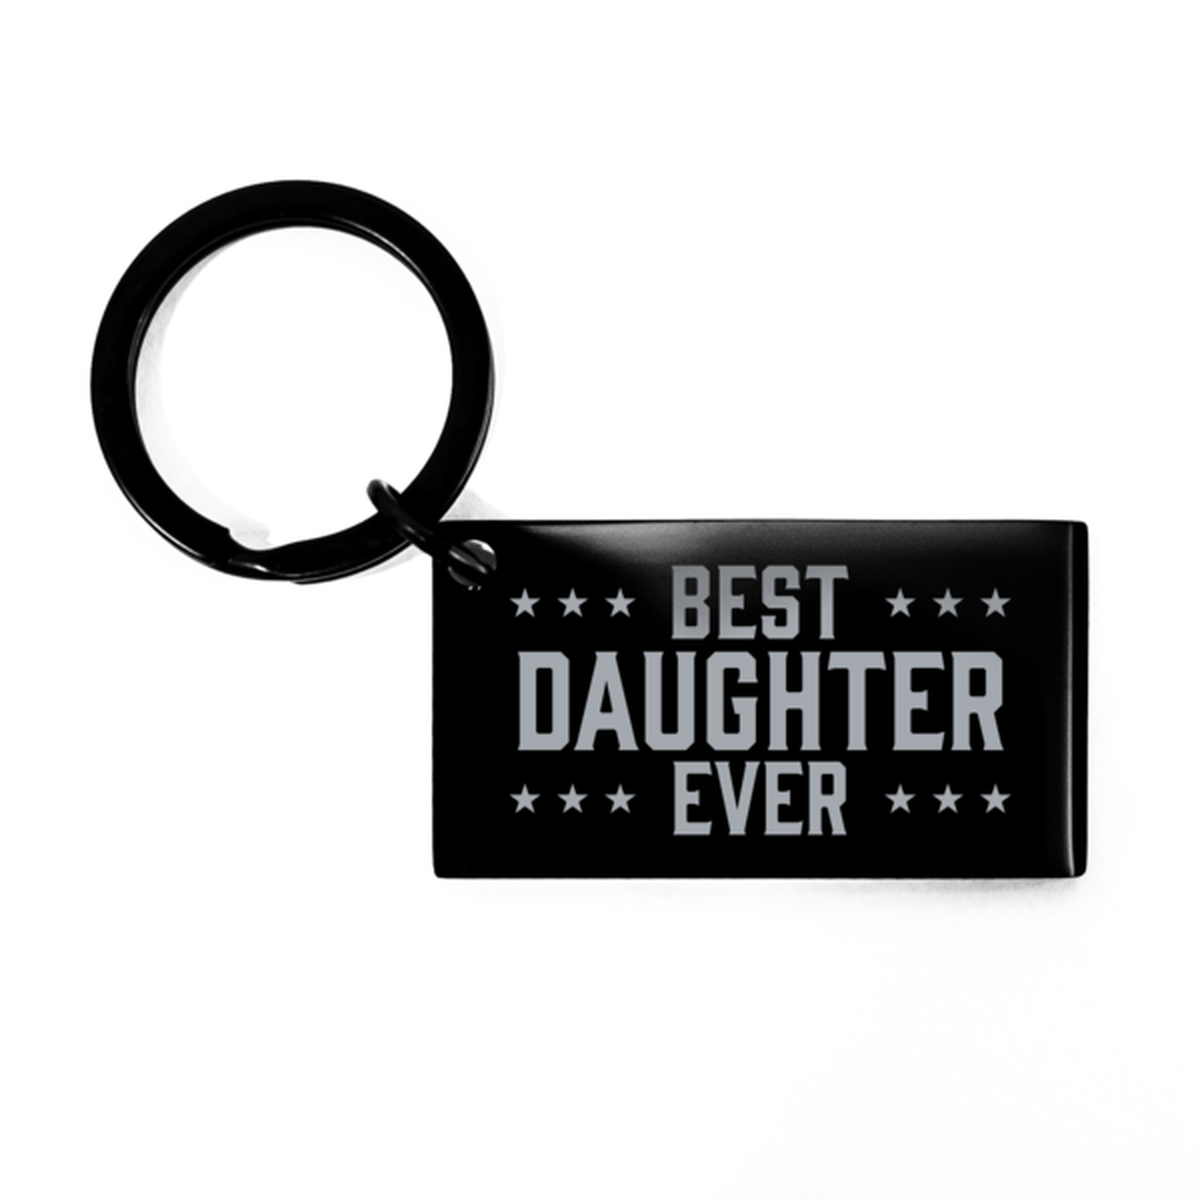 Best Daughter Ever Daughter Gifts, Funny Black Keychain For Daughter, Birthday Engraved Keyring Presents For Men